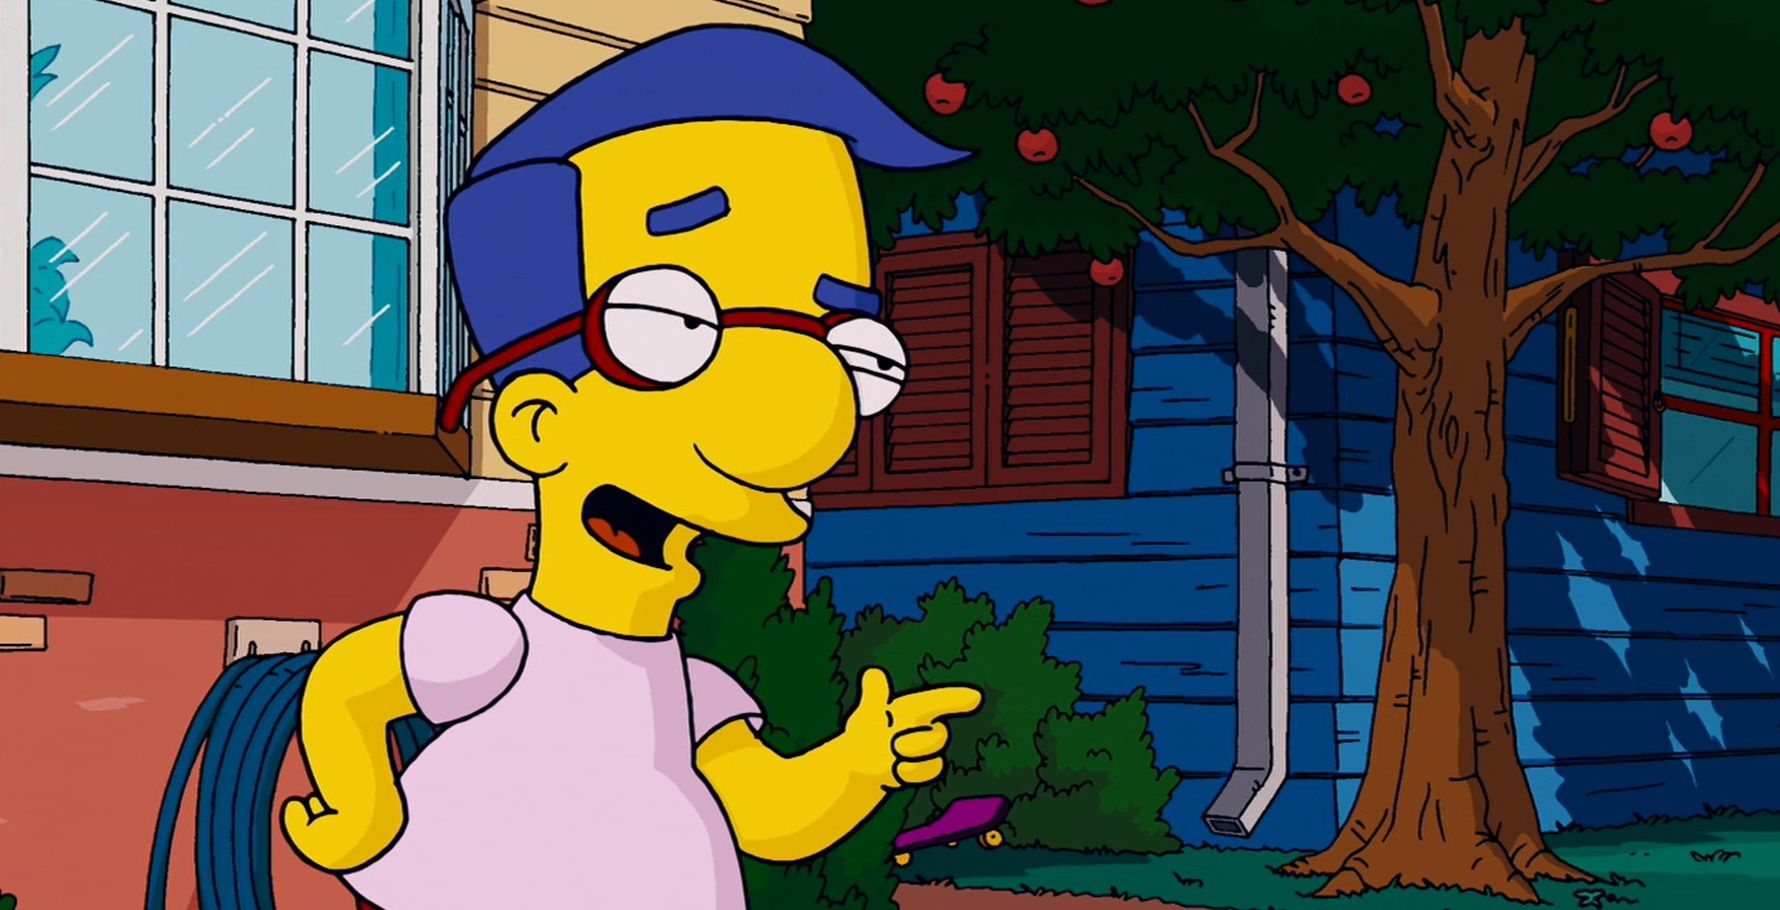 The Simpsons 10 Most Relatable Milhouse Quotes. 